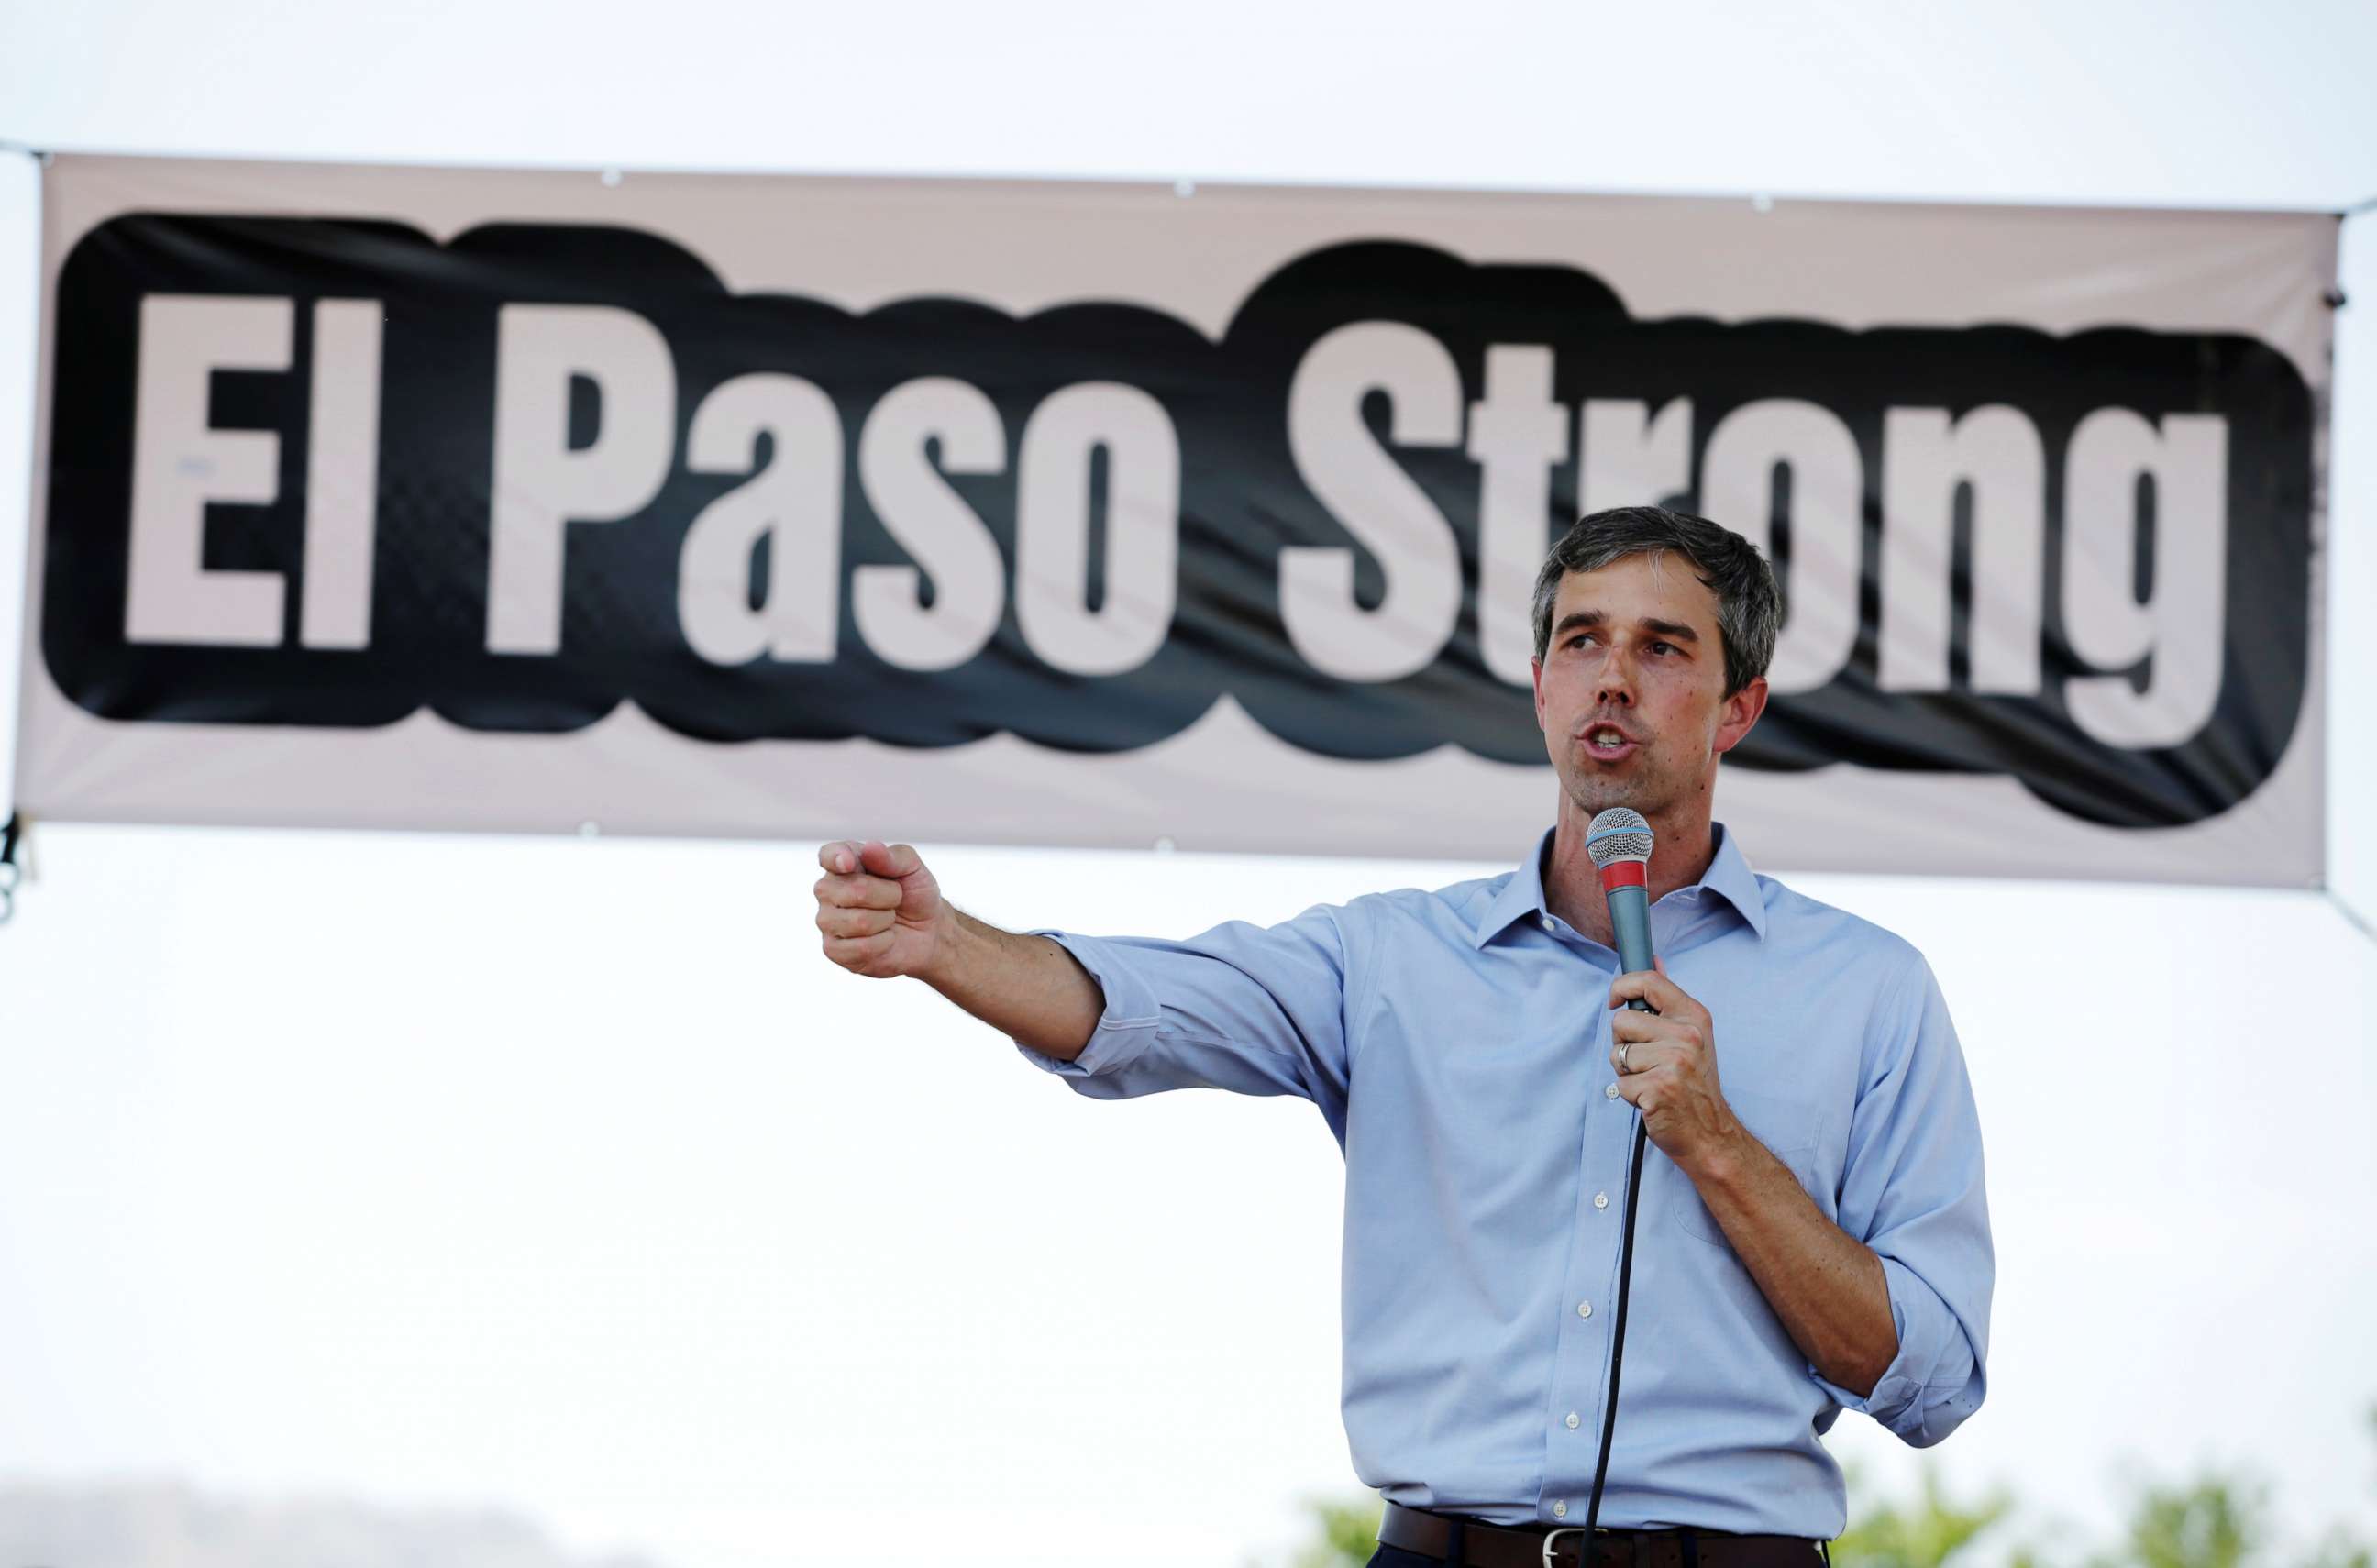 PHOTO: Democratic presidential candidate Beto O'Rourke speaks during a rally against the visit of President Donald Trump after a shooting at a Walmart store, in El Paso, Texas, Aug. 7, 2019.